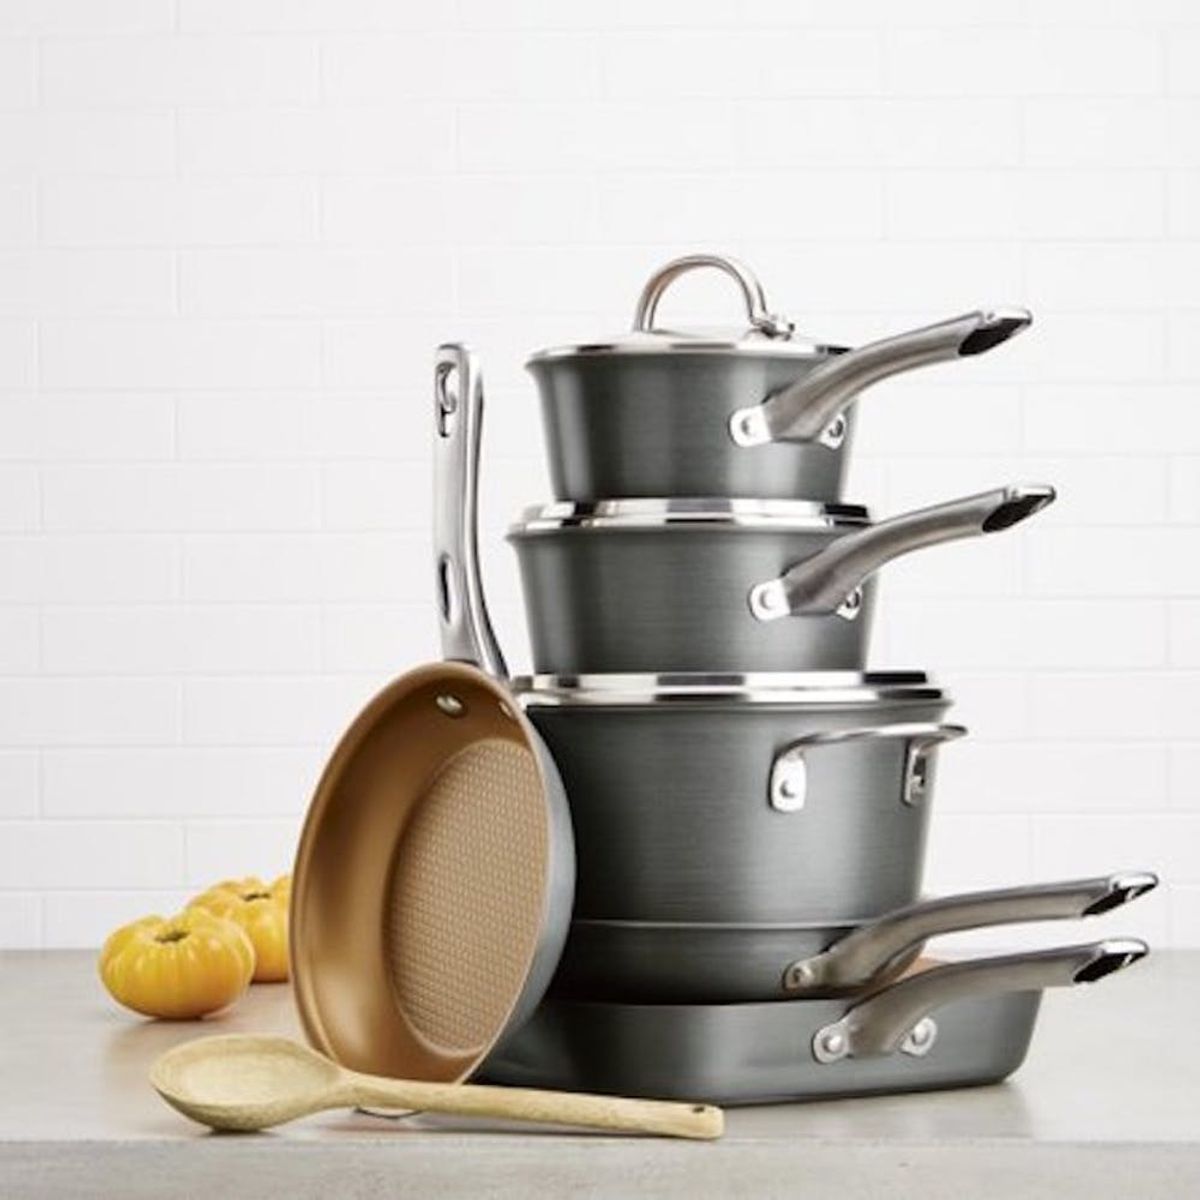 15 Pieces from the Ayesha Curry Kitchenware Collection That Will Inspire You to Cook More